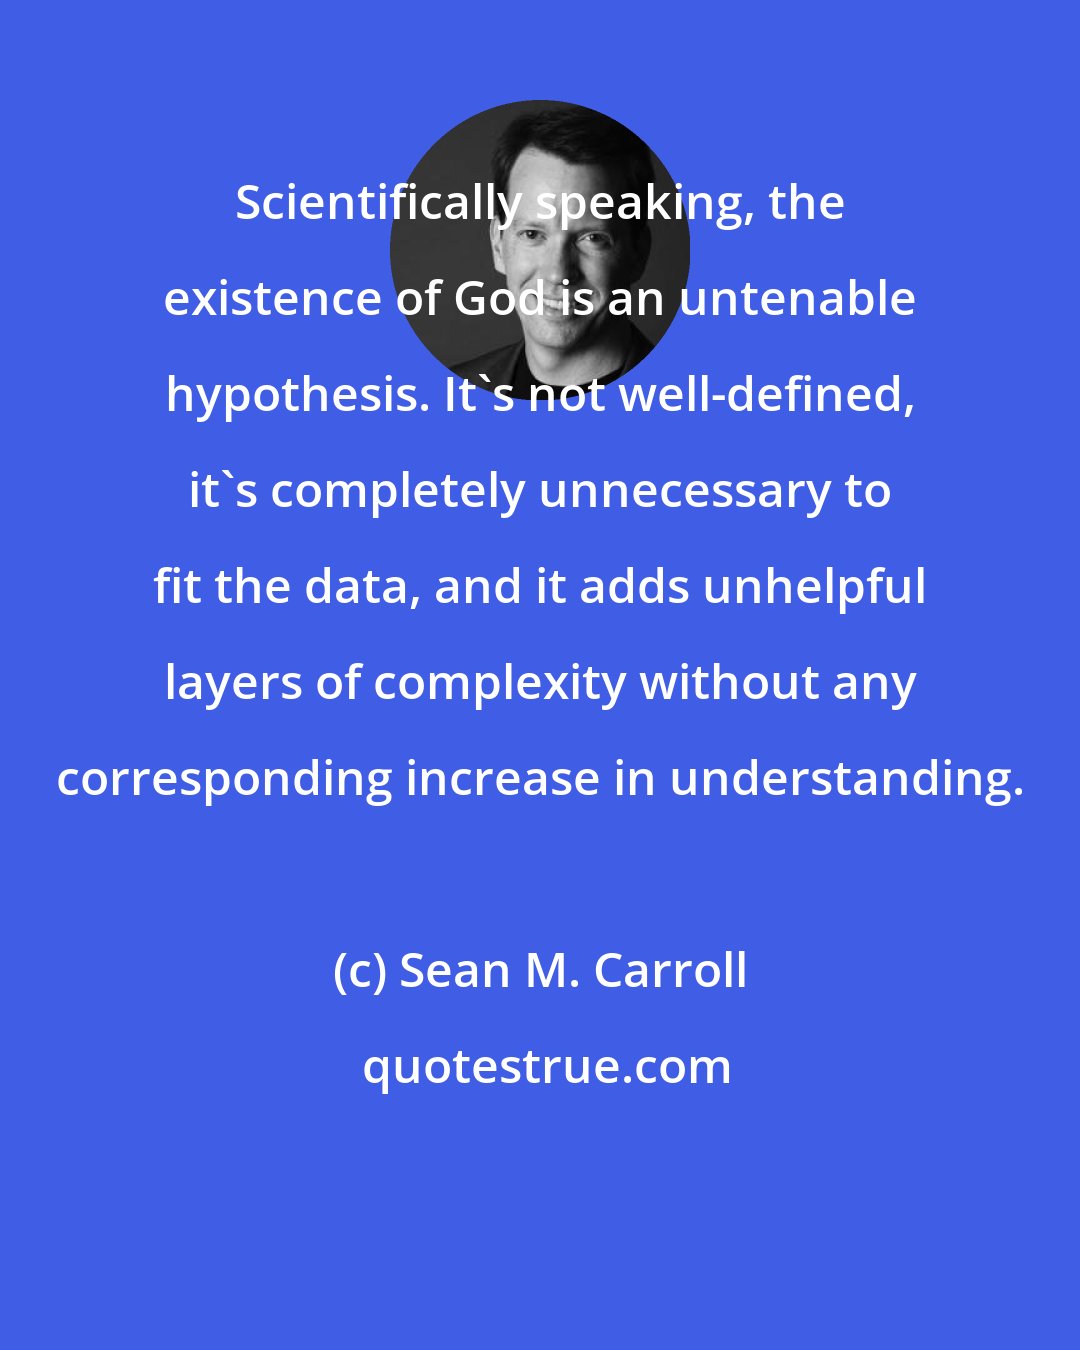 Sean M. Carroll: Scientifically speaking, the existence of God is an untenable hypothesis. It's not well-defined, it's completely unnecessary to fit the data, and it adds unhelpful layers of complexity without any corresponding increase in understanding.